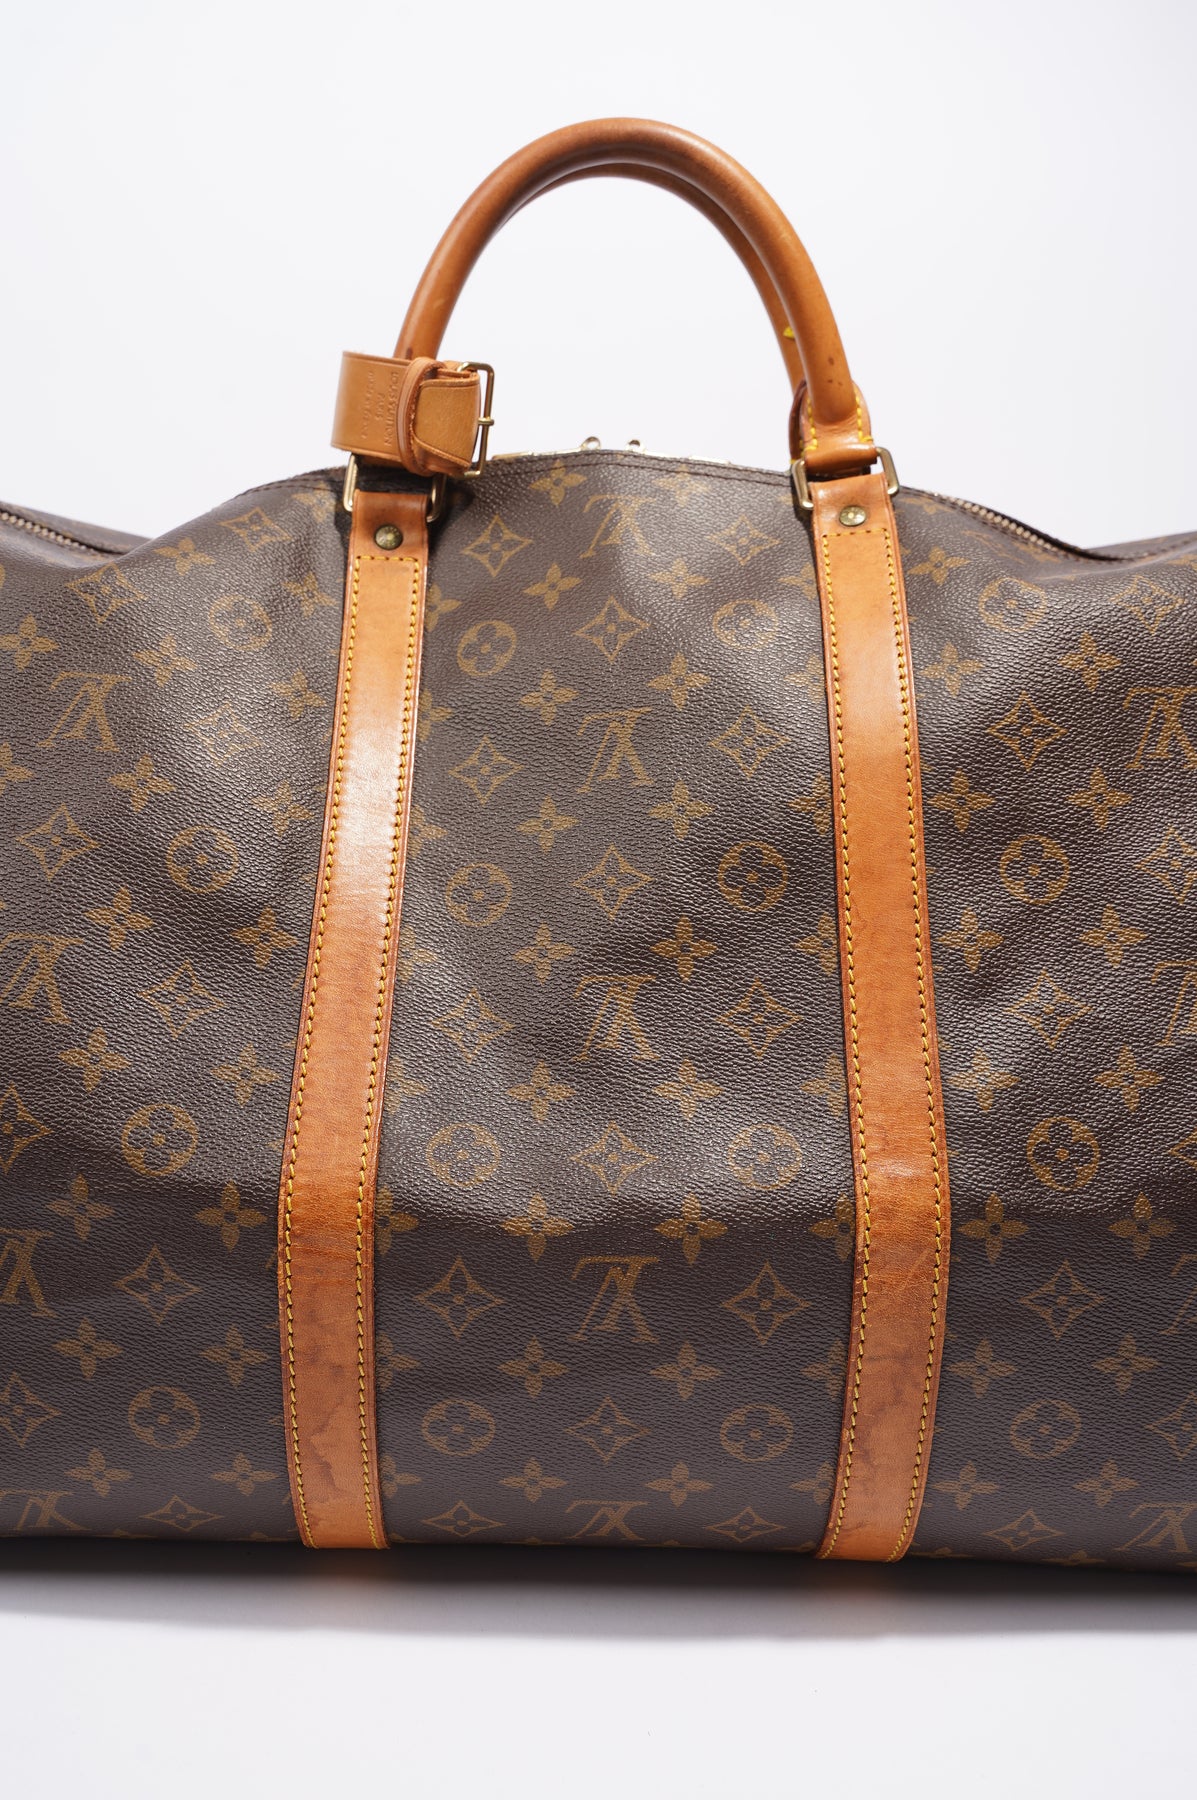 Vintage 1992 Louis Vuitton Keep All Bandouliere 60